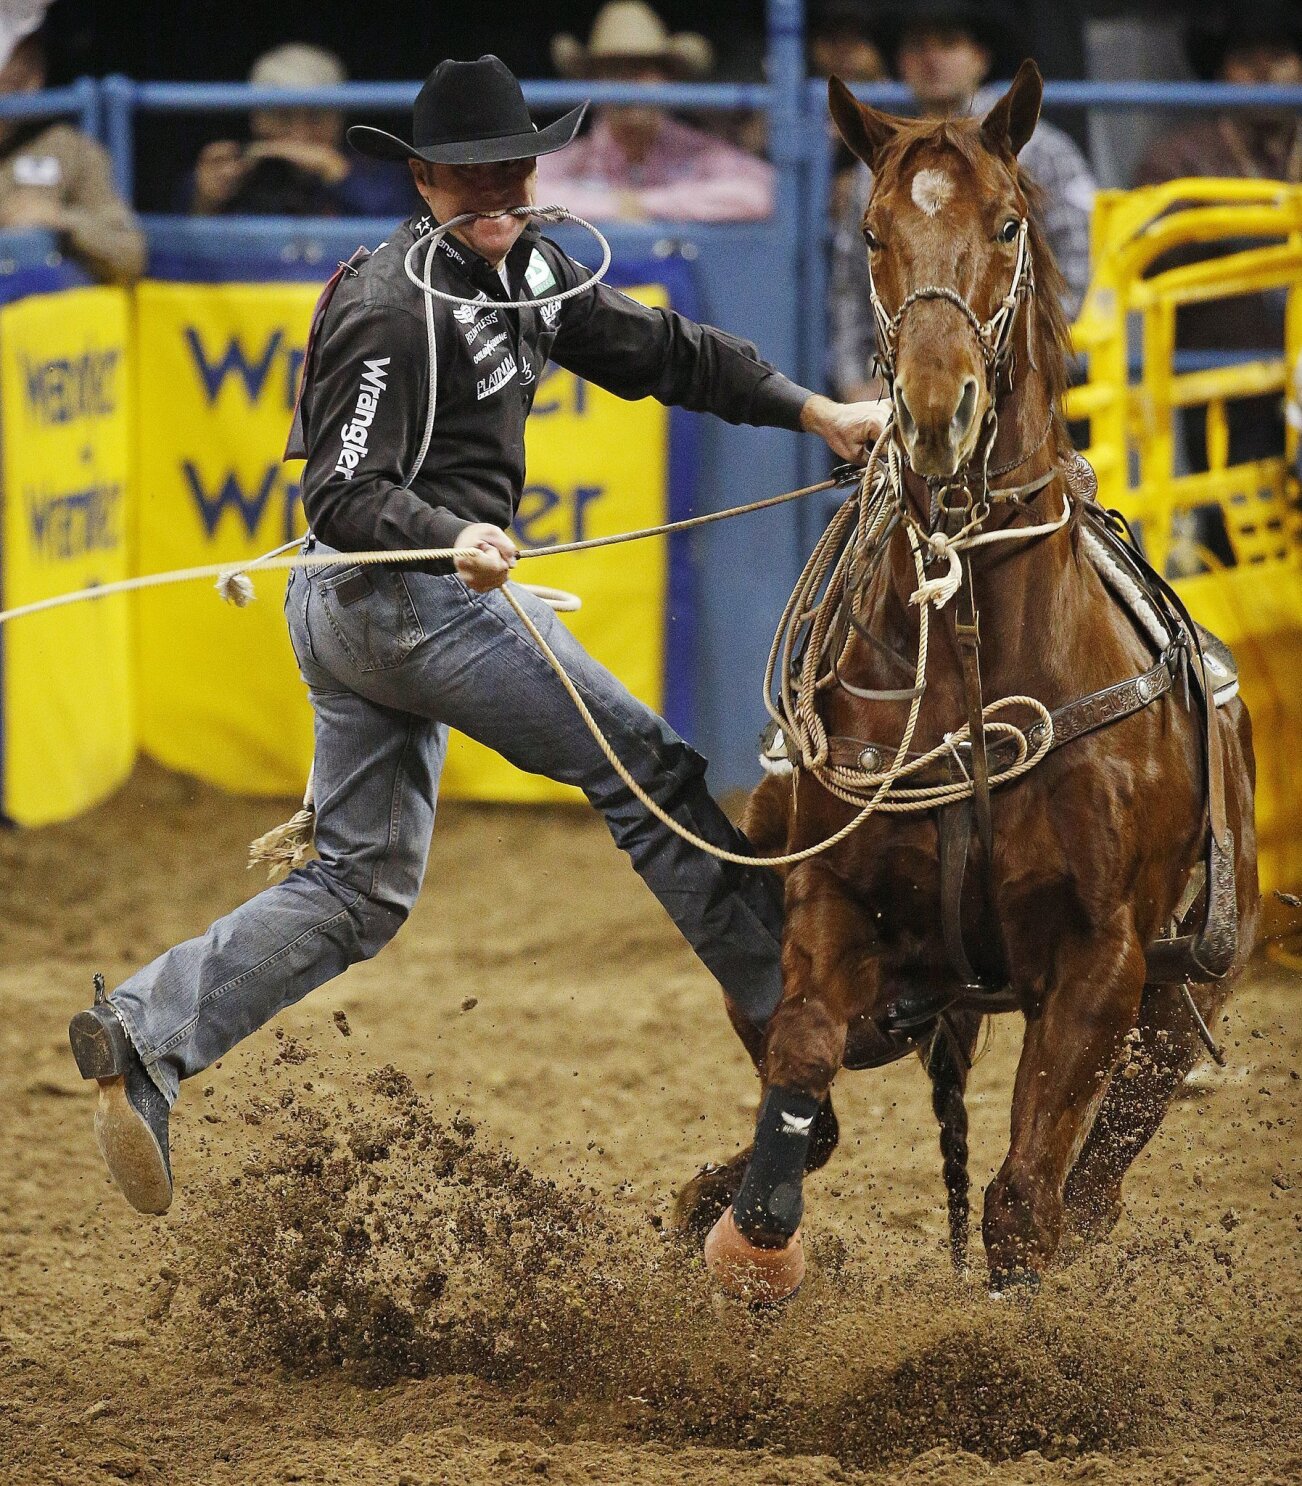 Brazile Surges In Standings After Tying Record At Nfr The San Diego Union Tribune